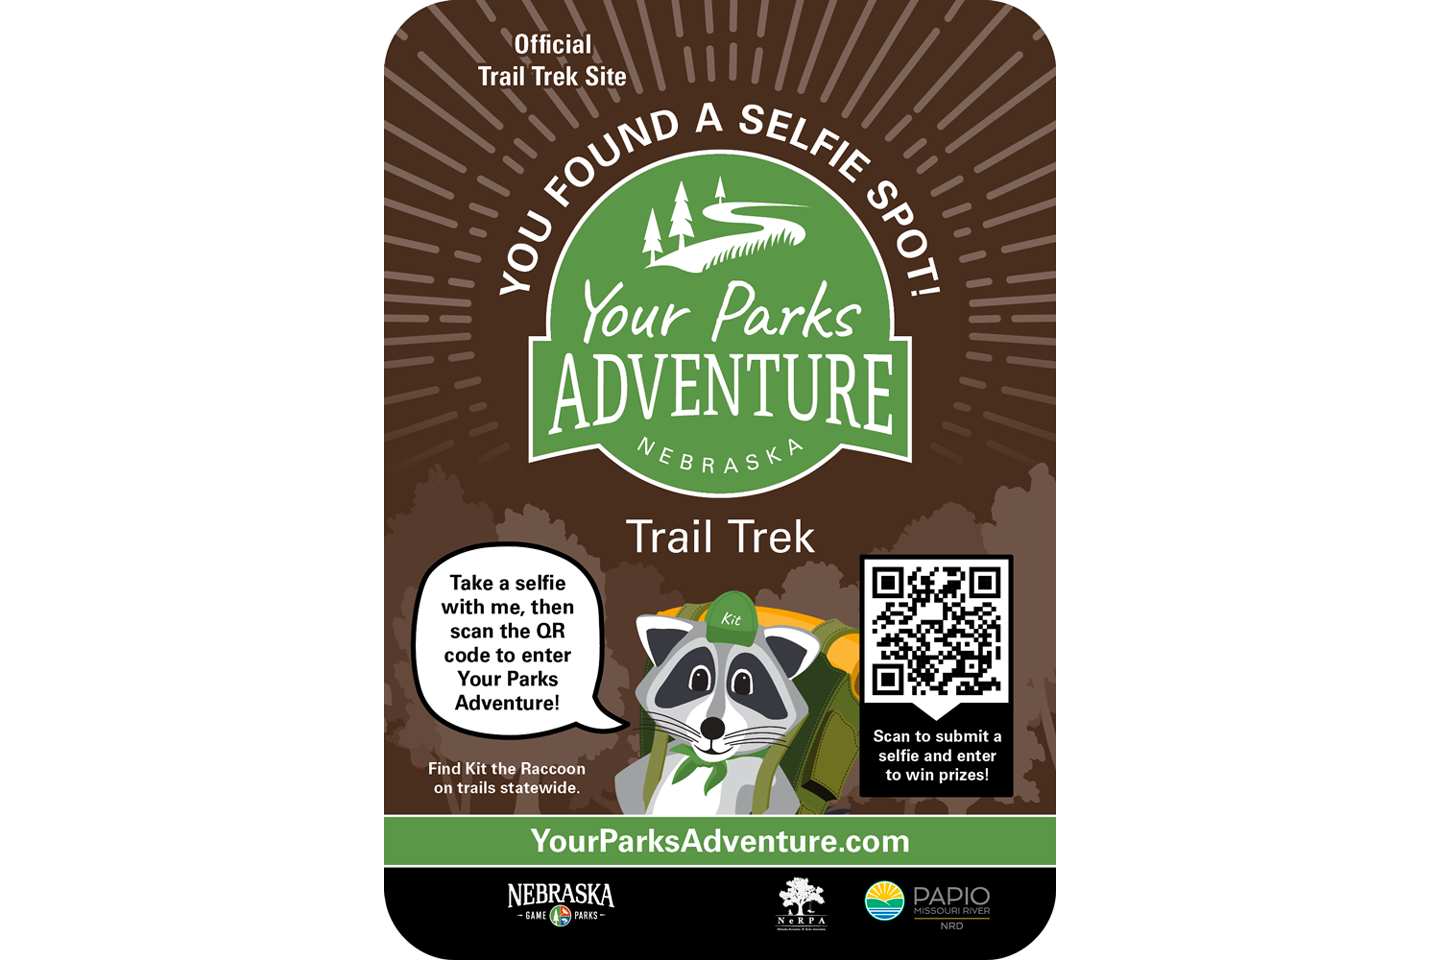 Hit the trails for prizes in new adventure challenge